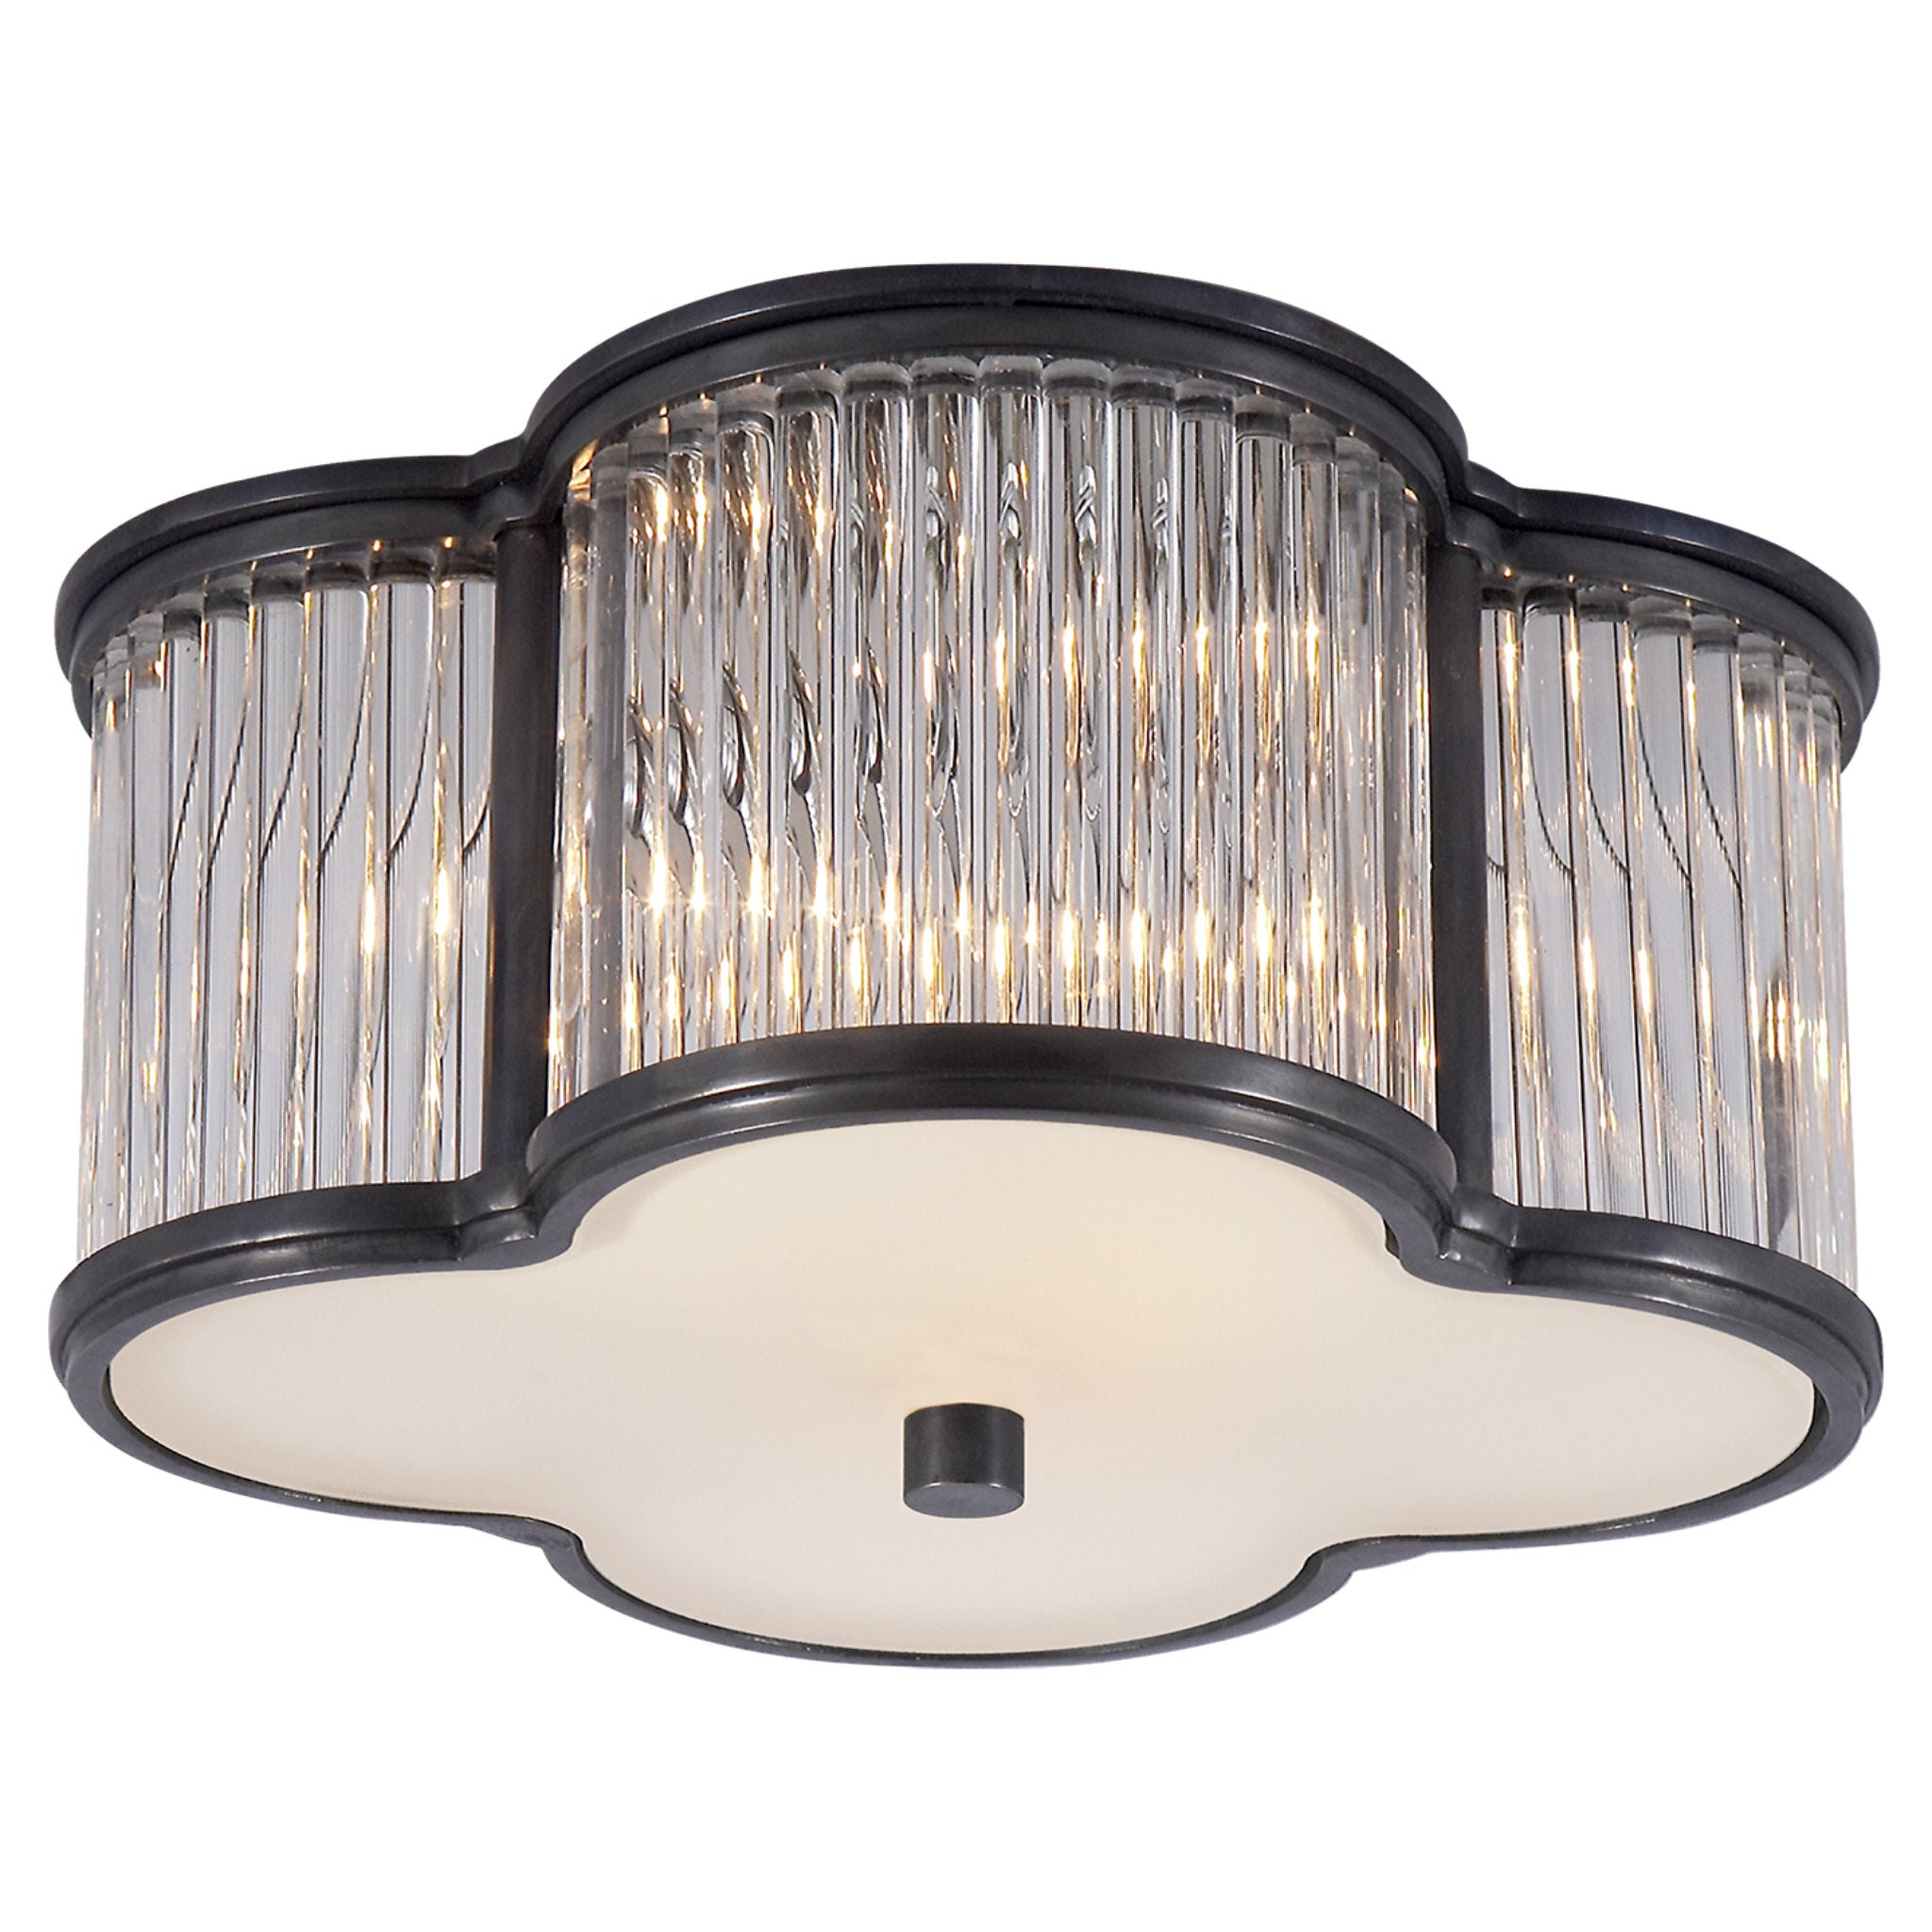 Alexa Hampton Basil Small Flush Mount in Gun Metal and Clear Glass Rods with Frosted Glass